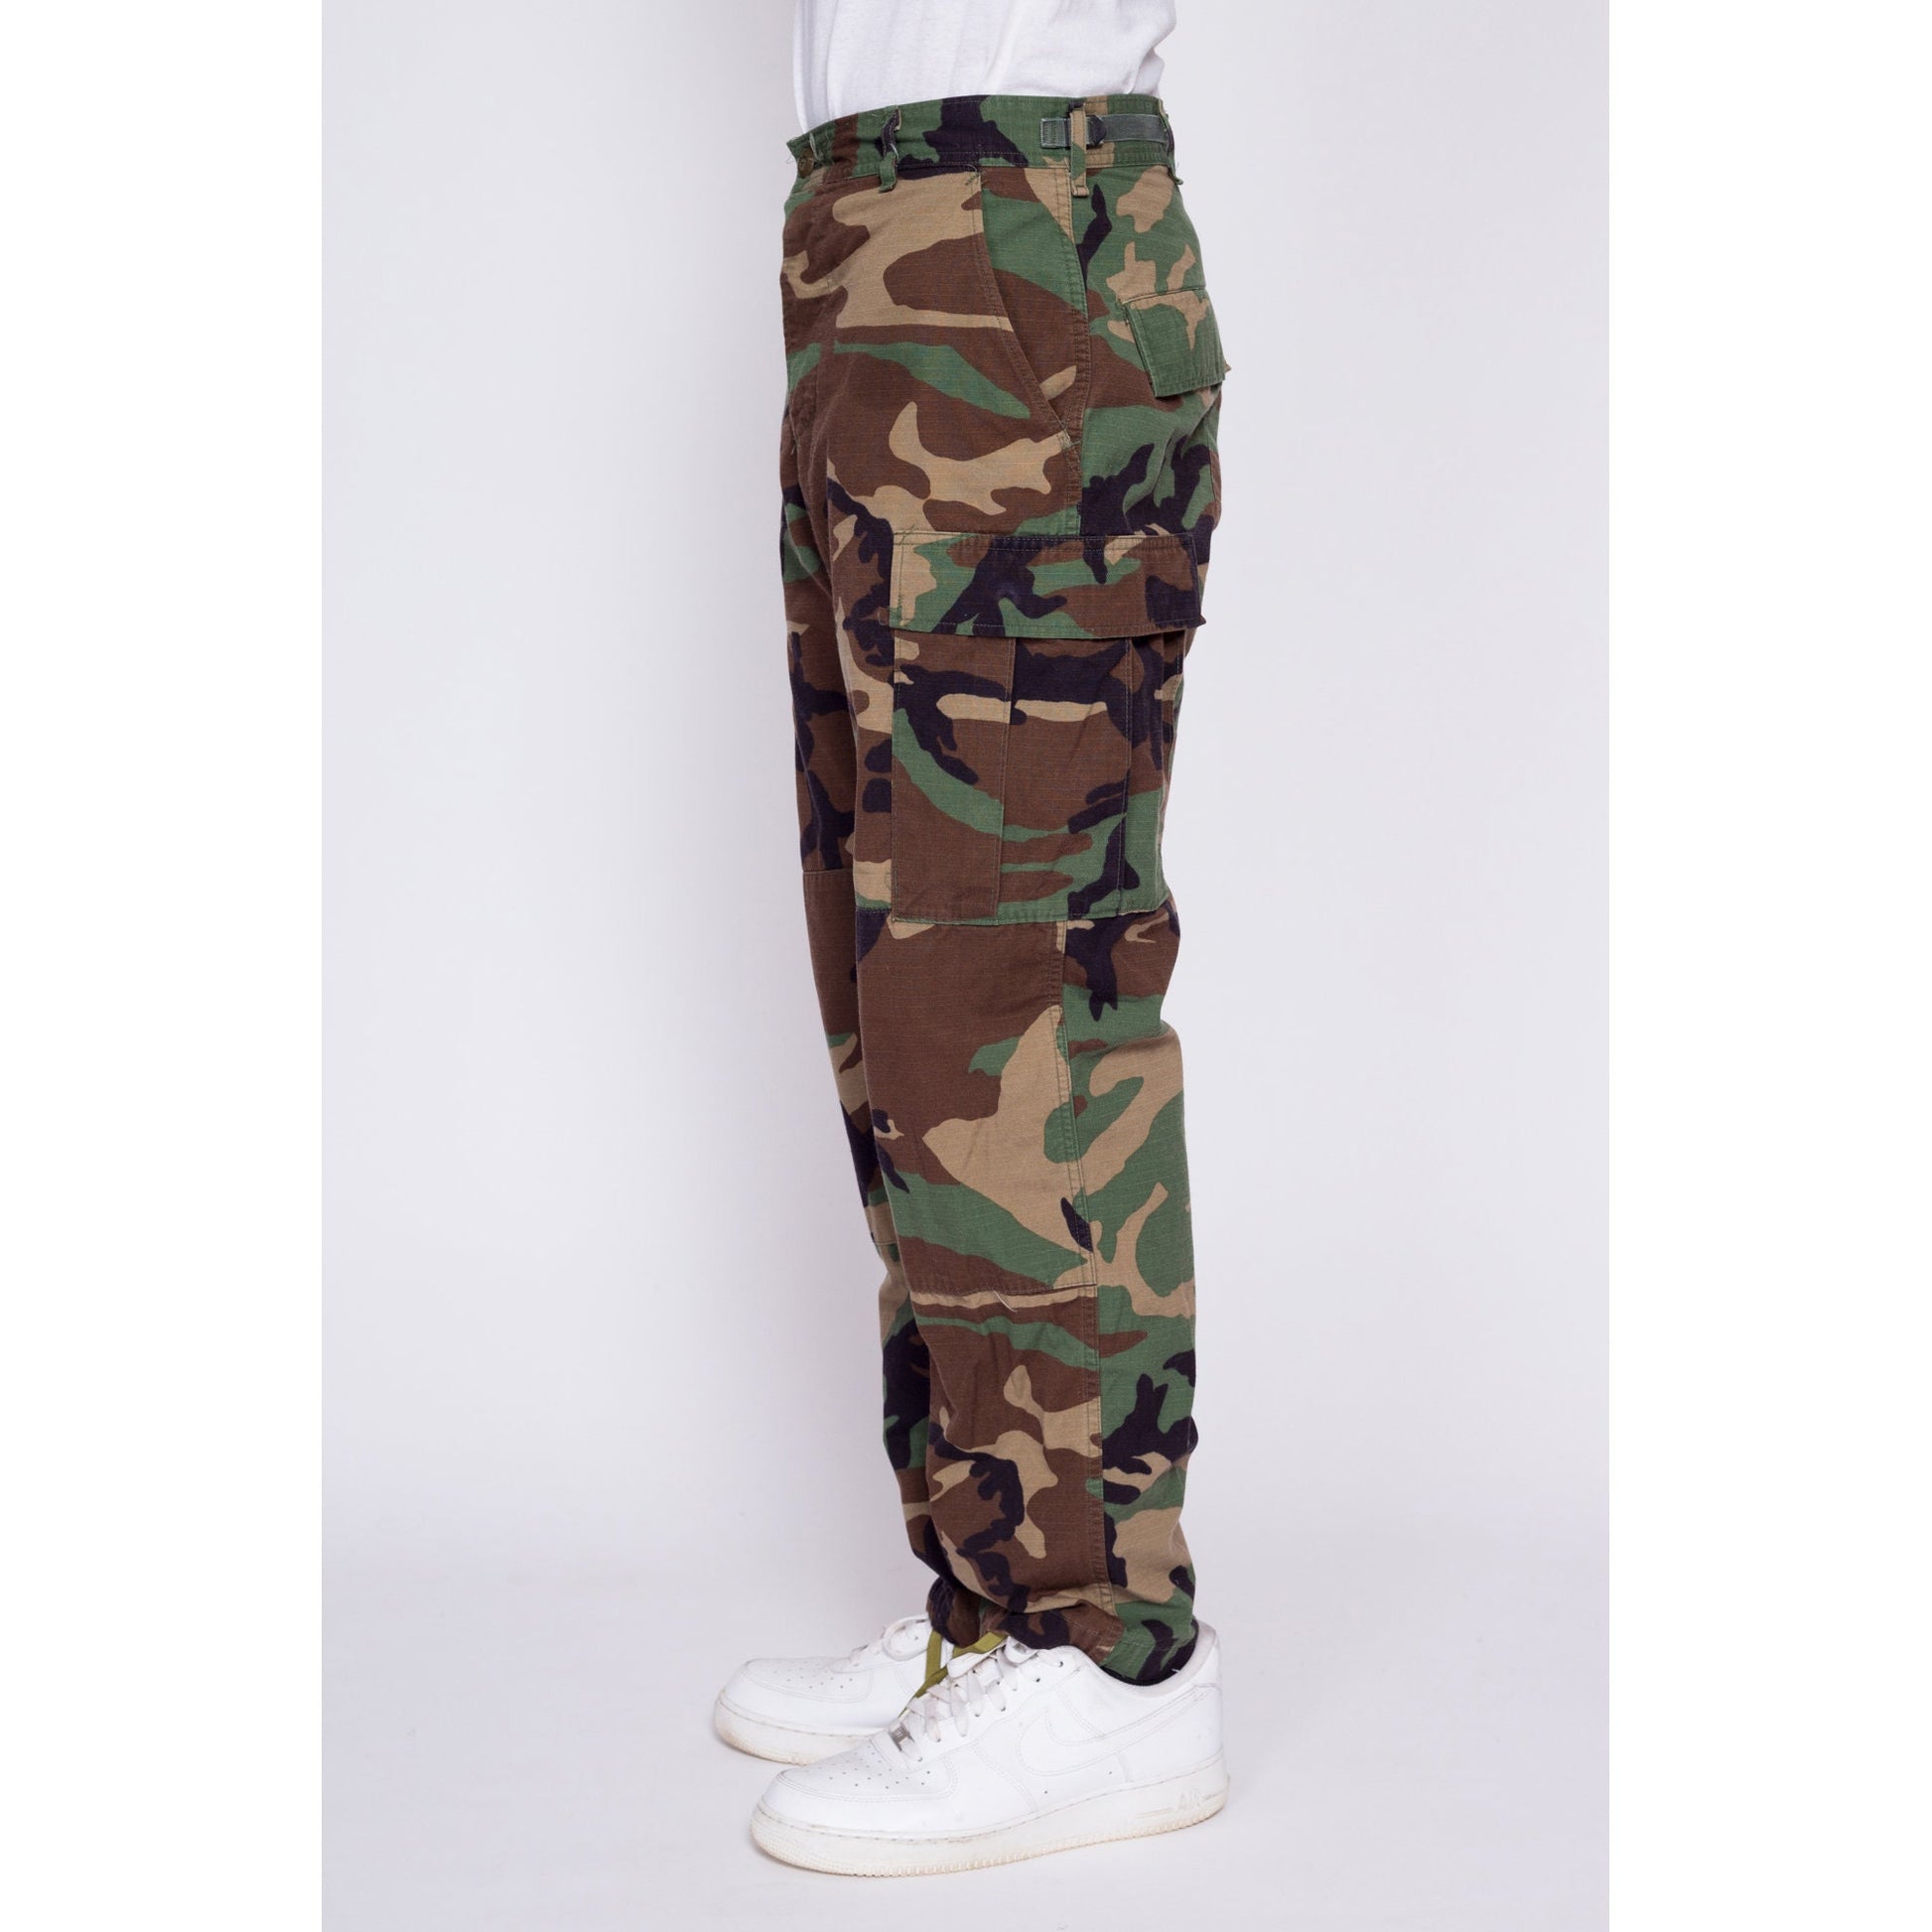 Vintage Camo Cargo Field Pants - 25"-30" Waist | Unisex Military Olive Drab Camouflage Army Trousers